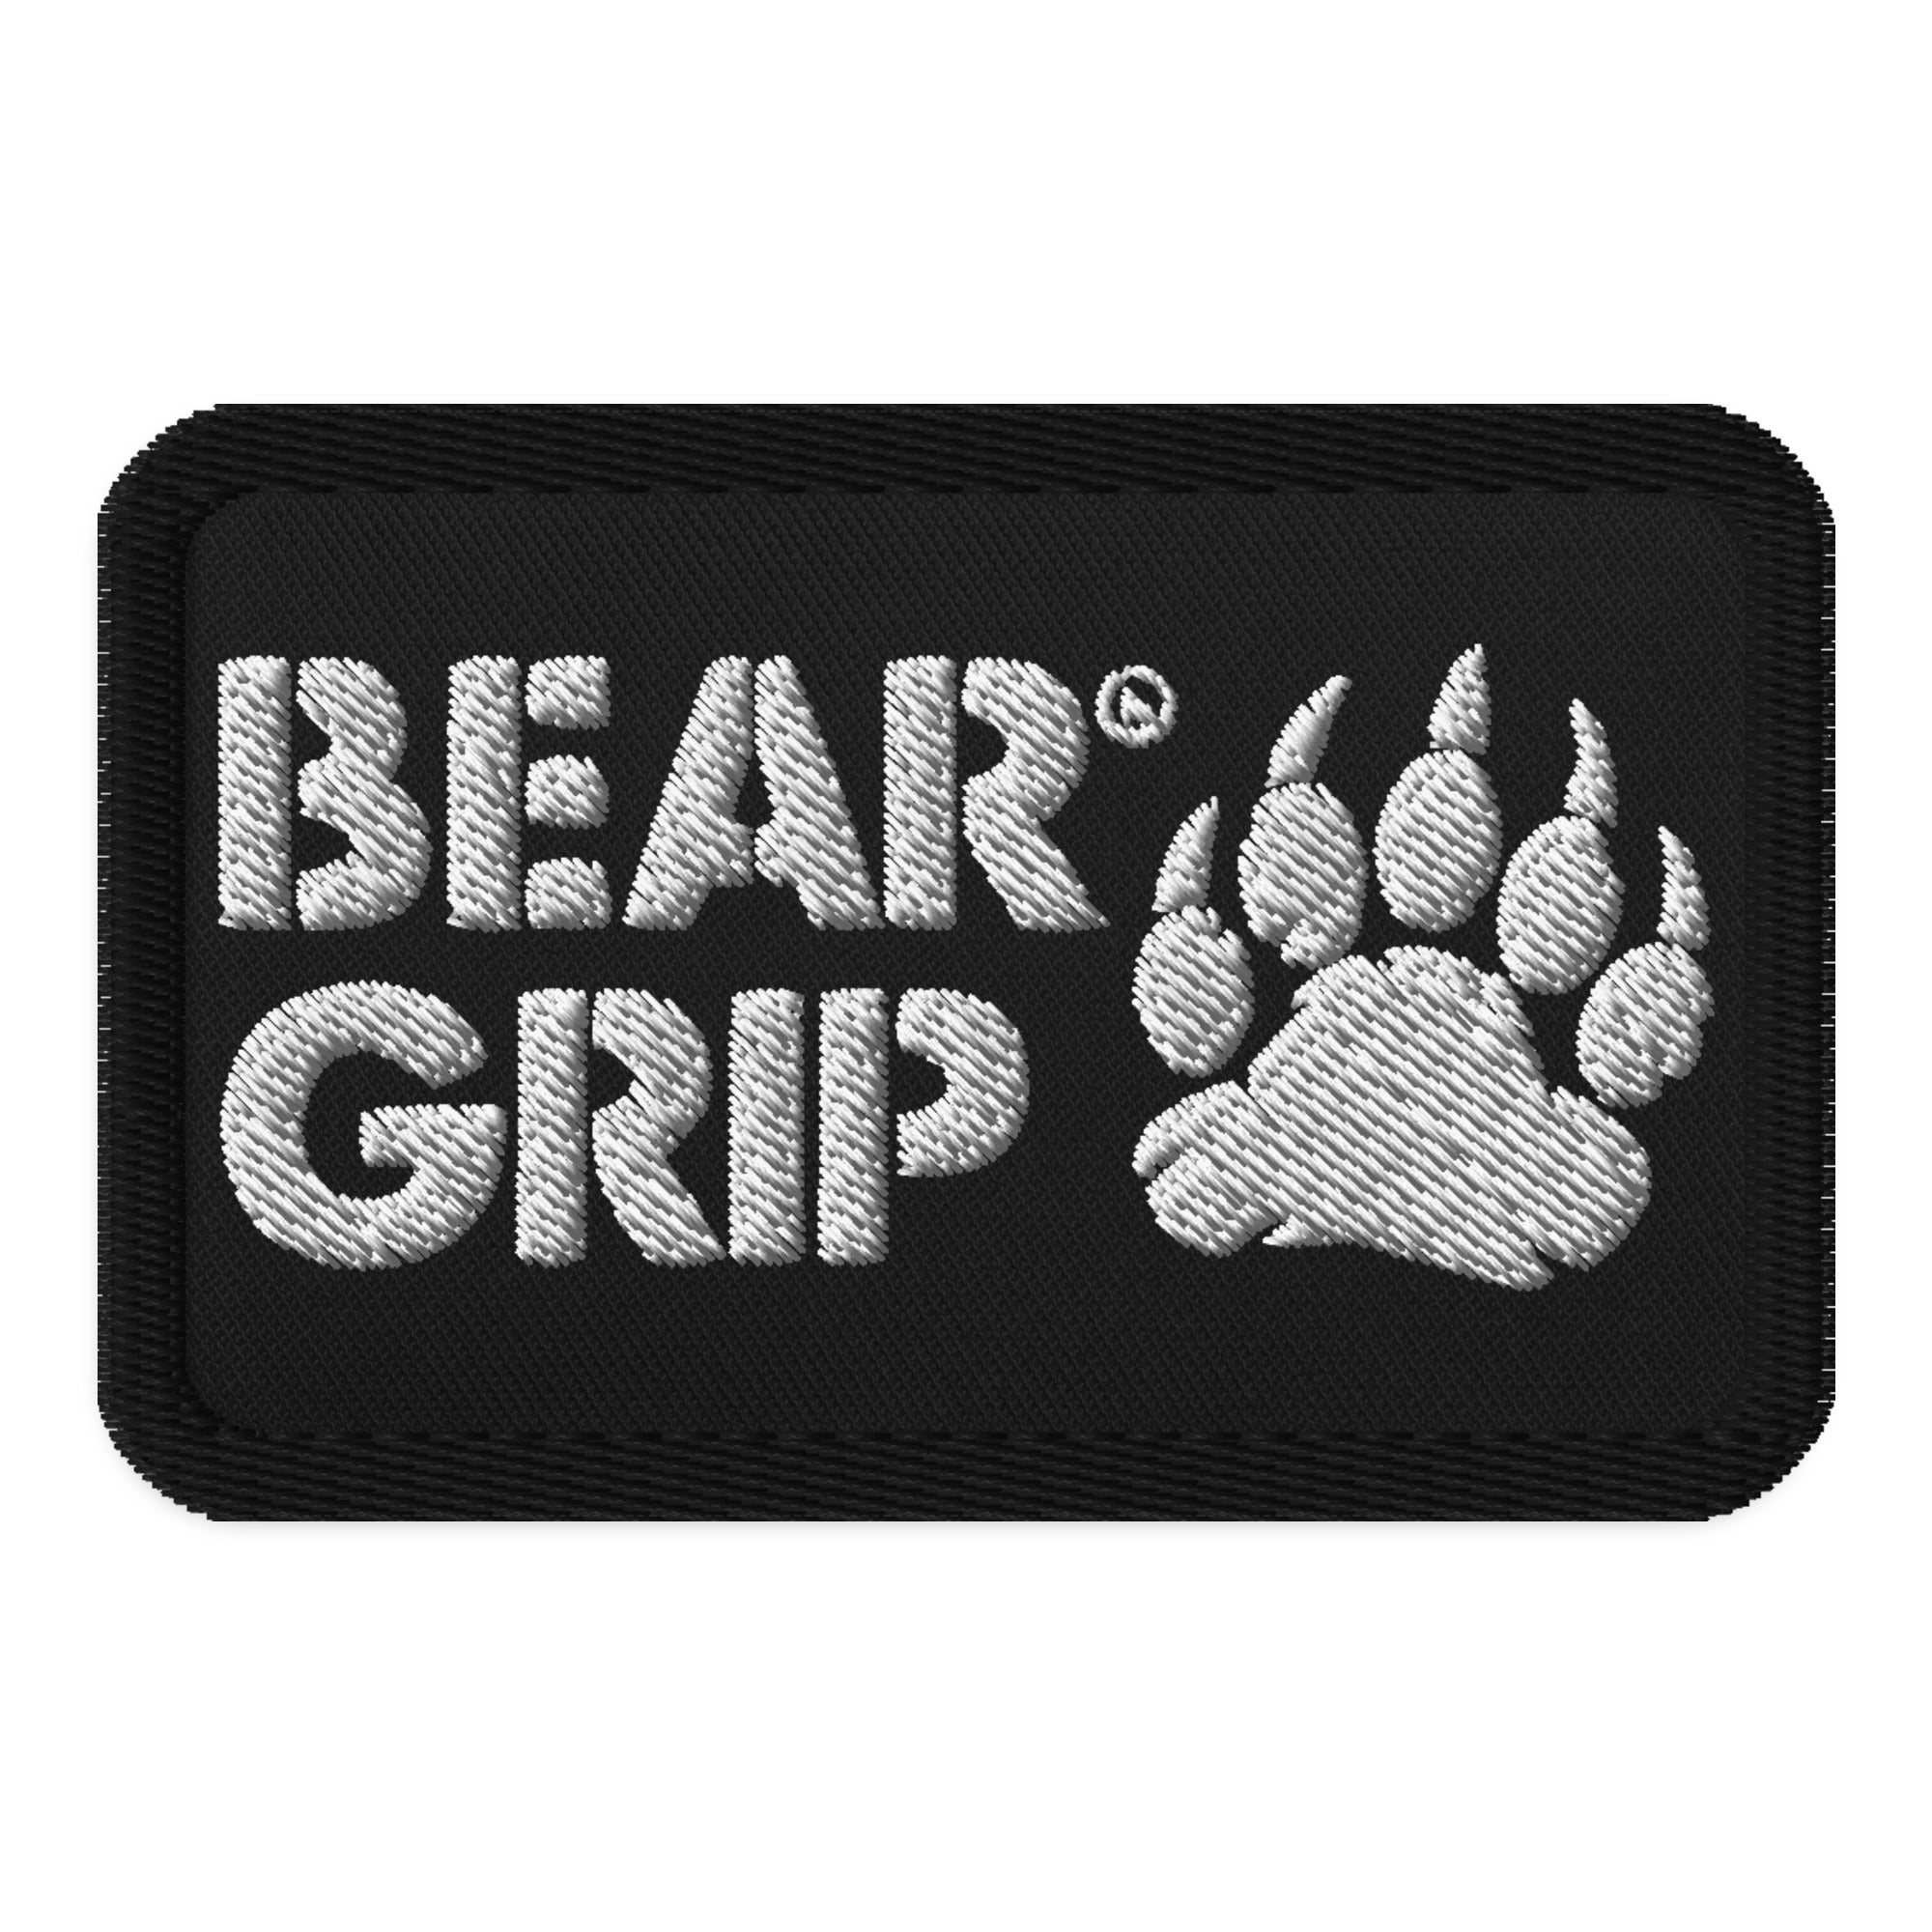 BEAR GRIP Embroidered patches